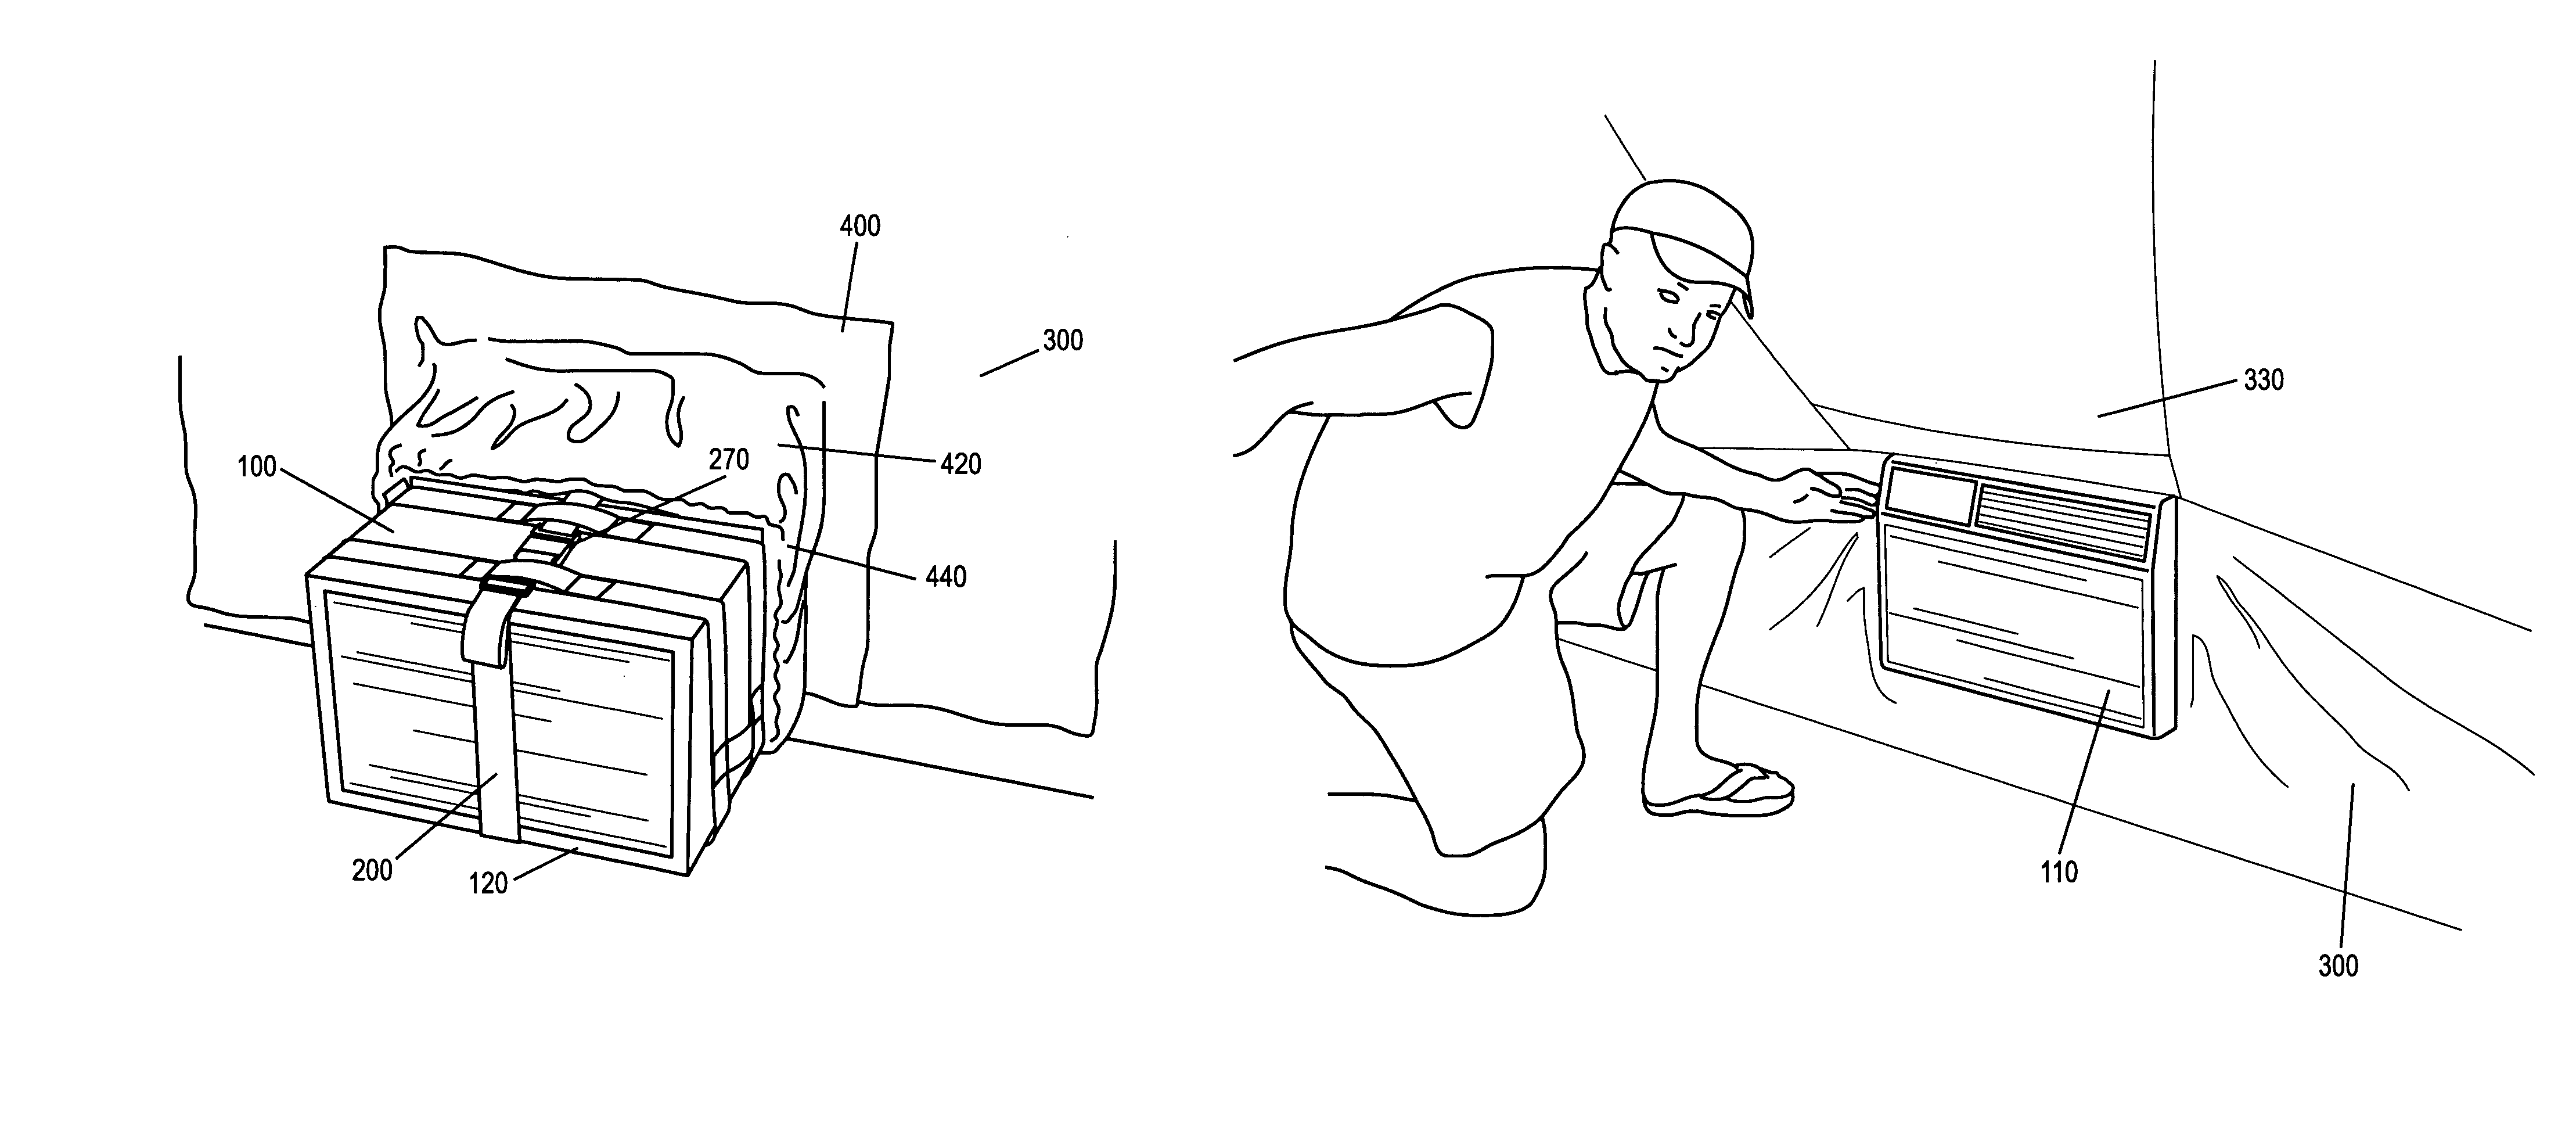 Climate controlled portable dwelling and method of use